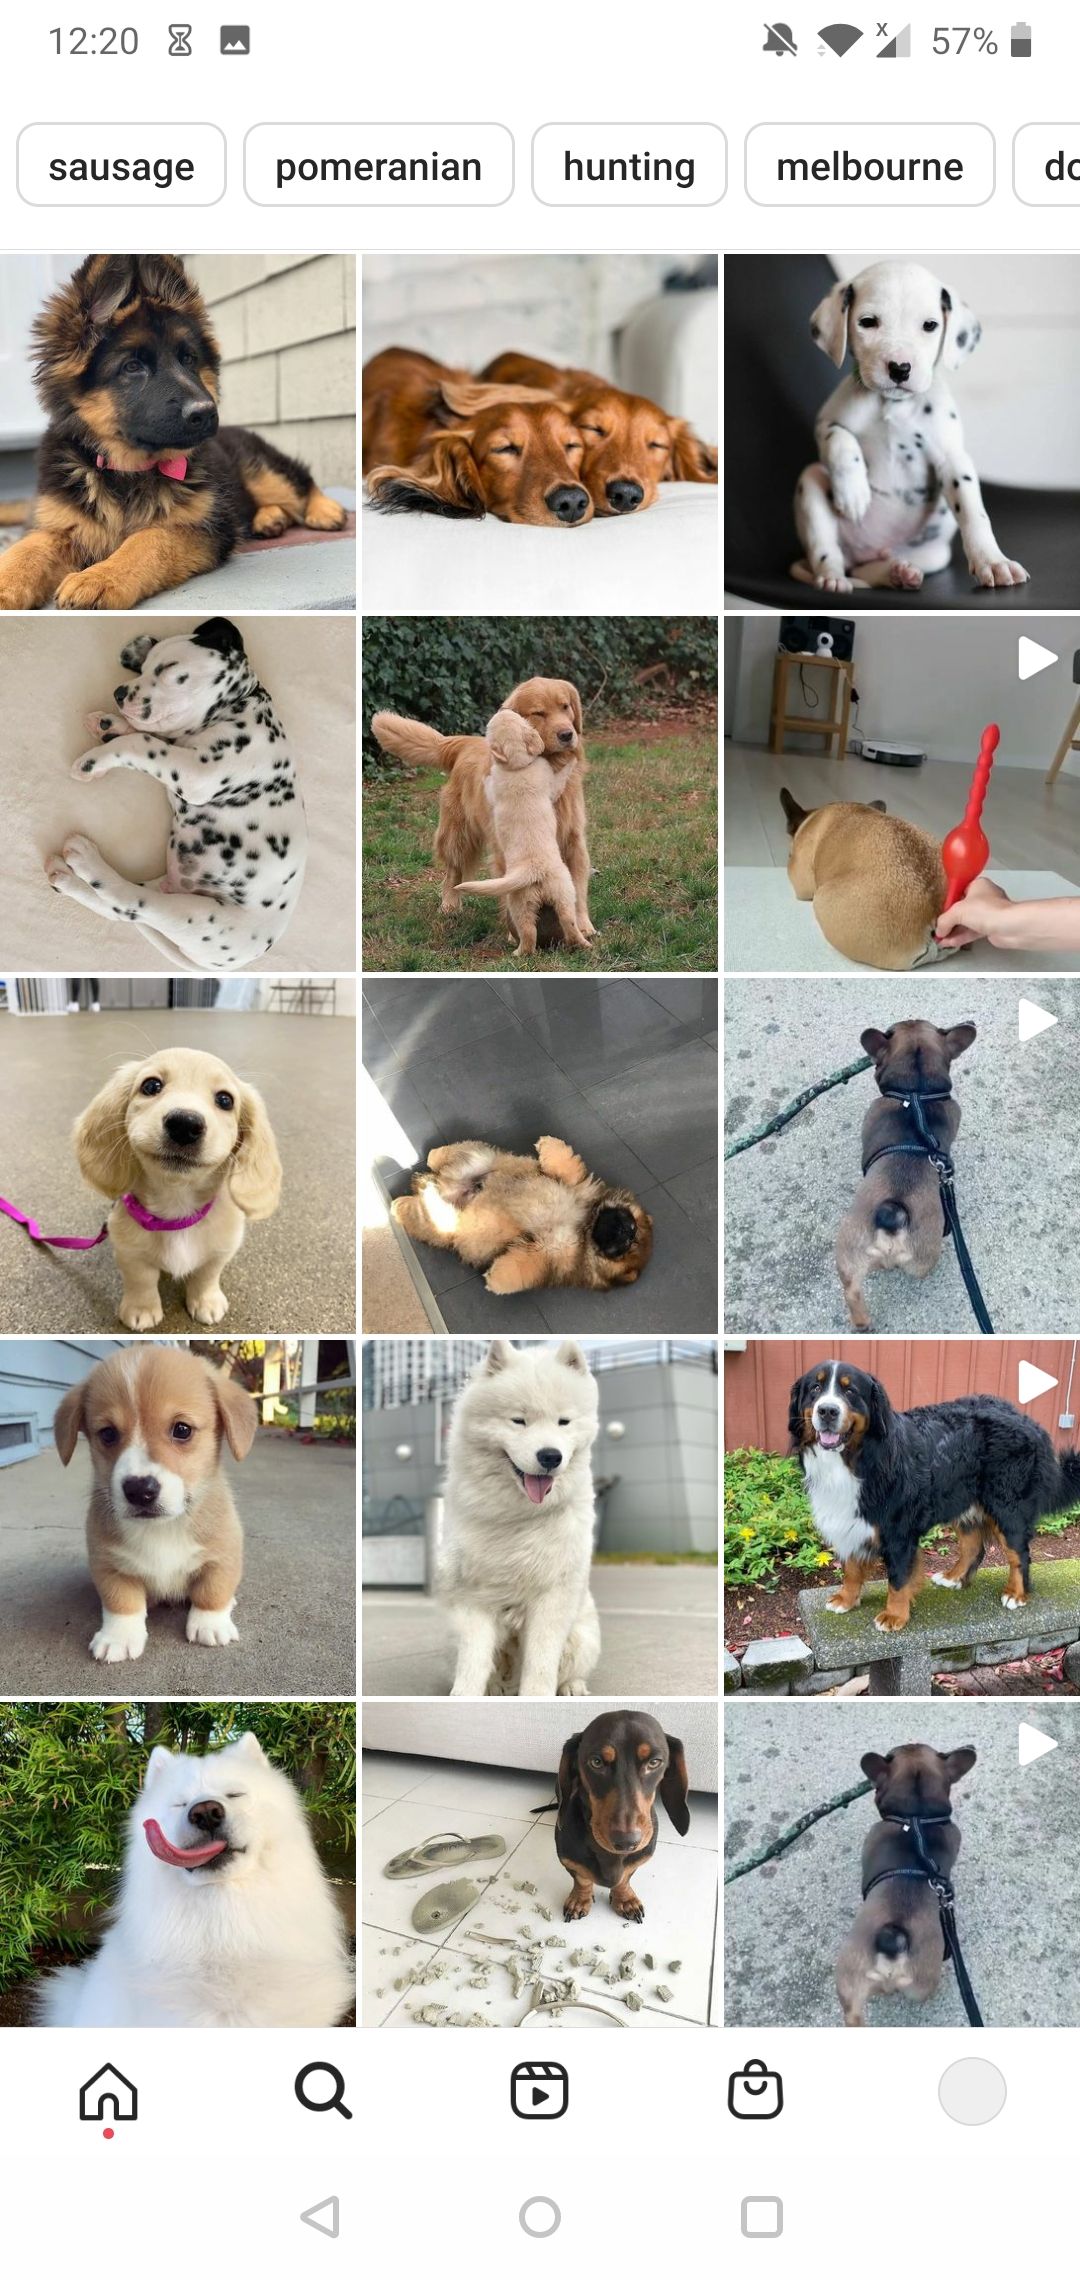 Exploring pictures of dogs on Instagram